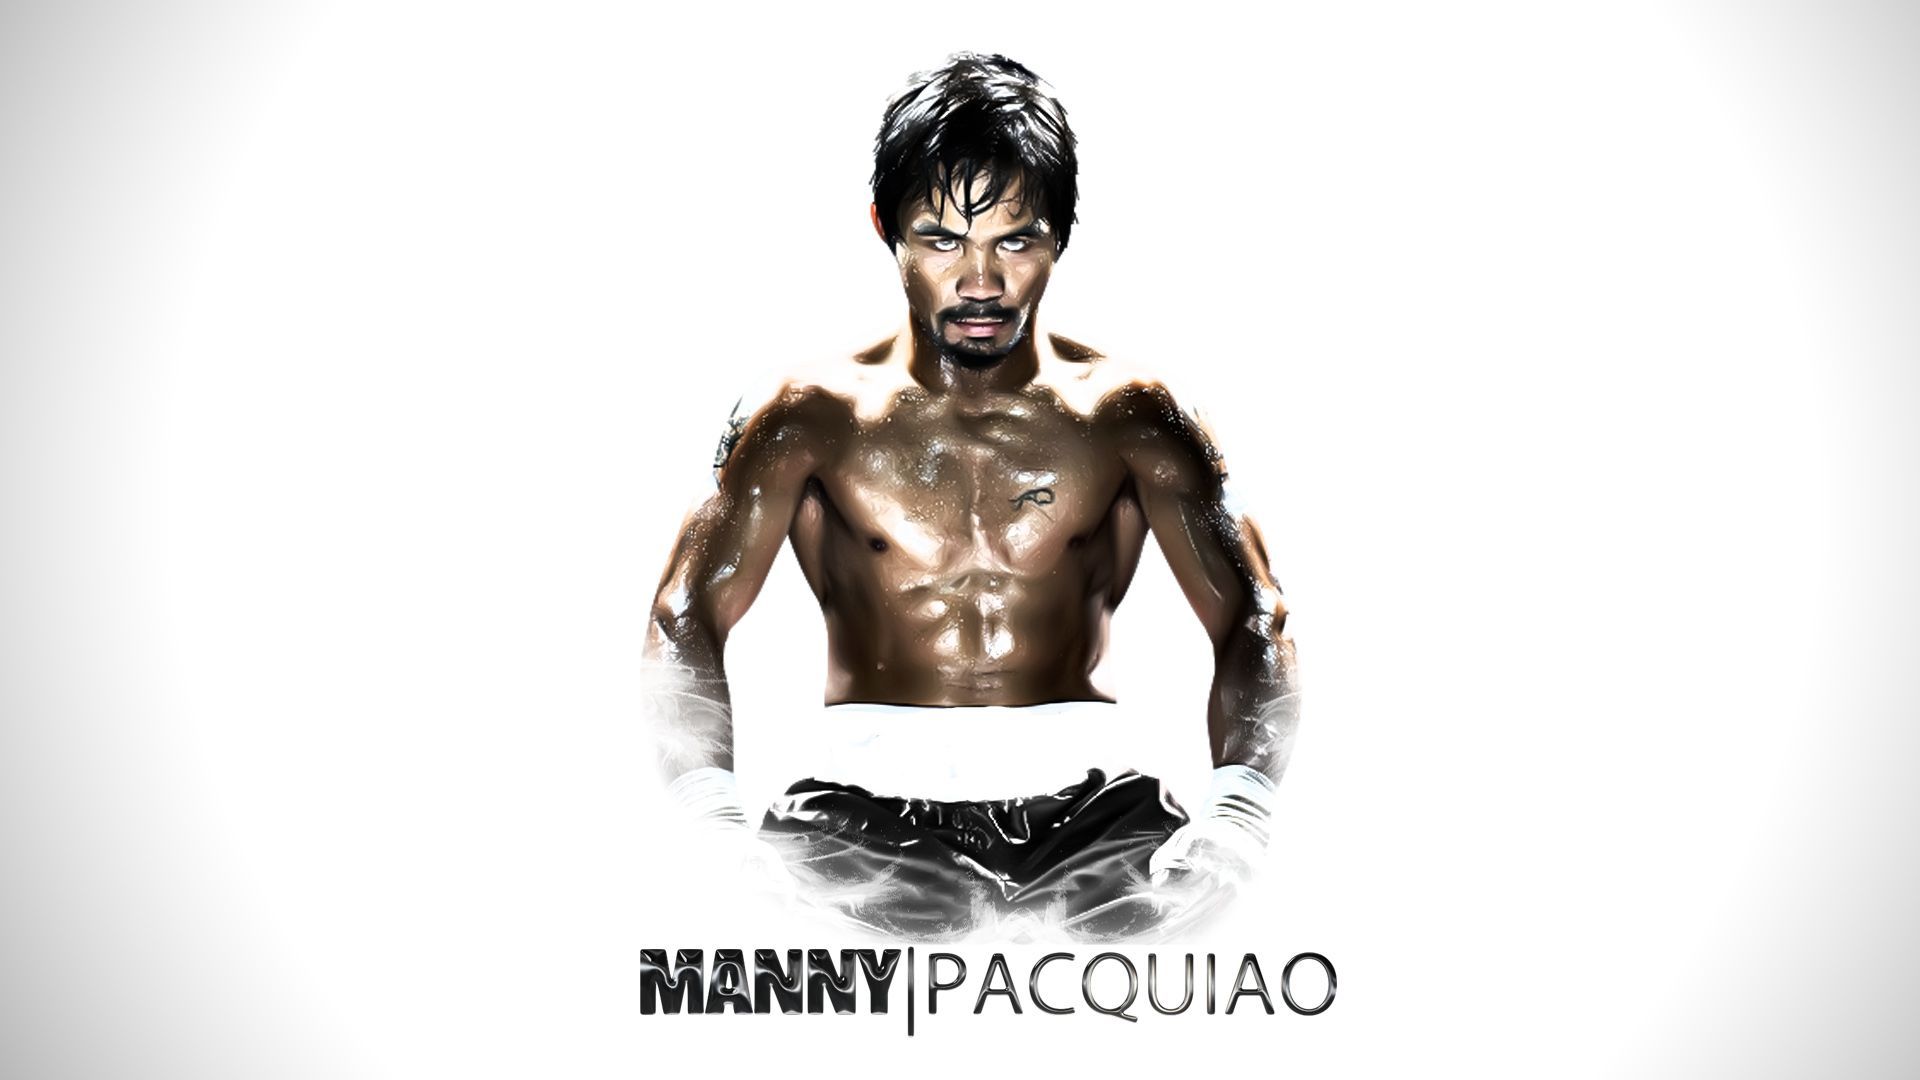 Manny Pacquiao wallpaper hd free download